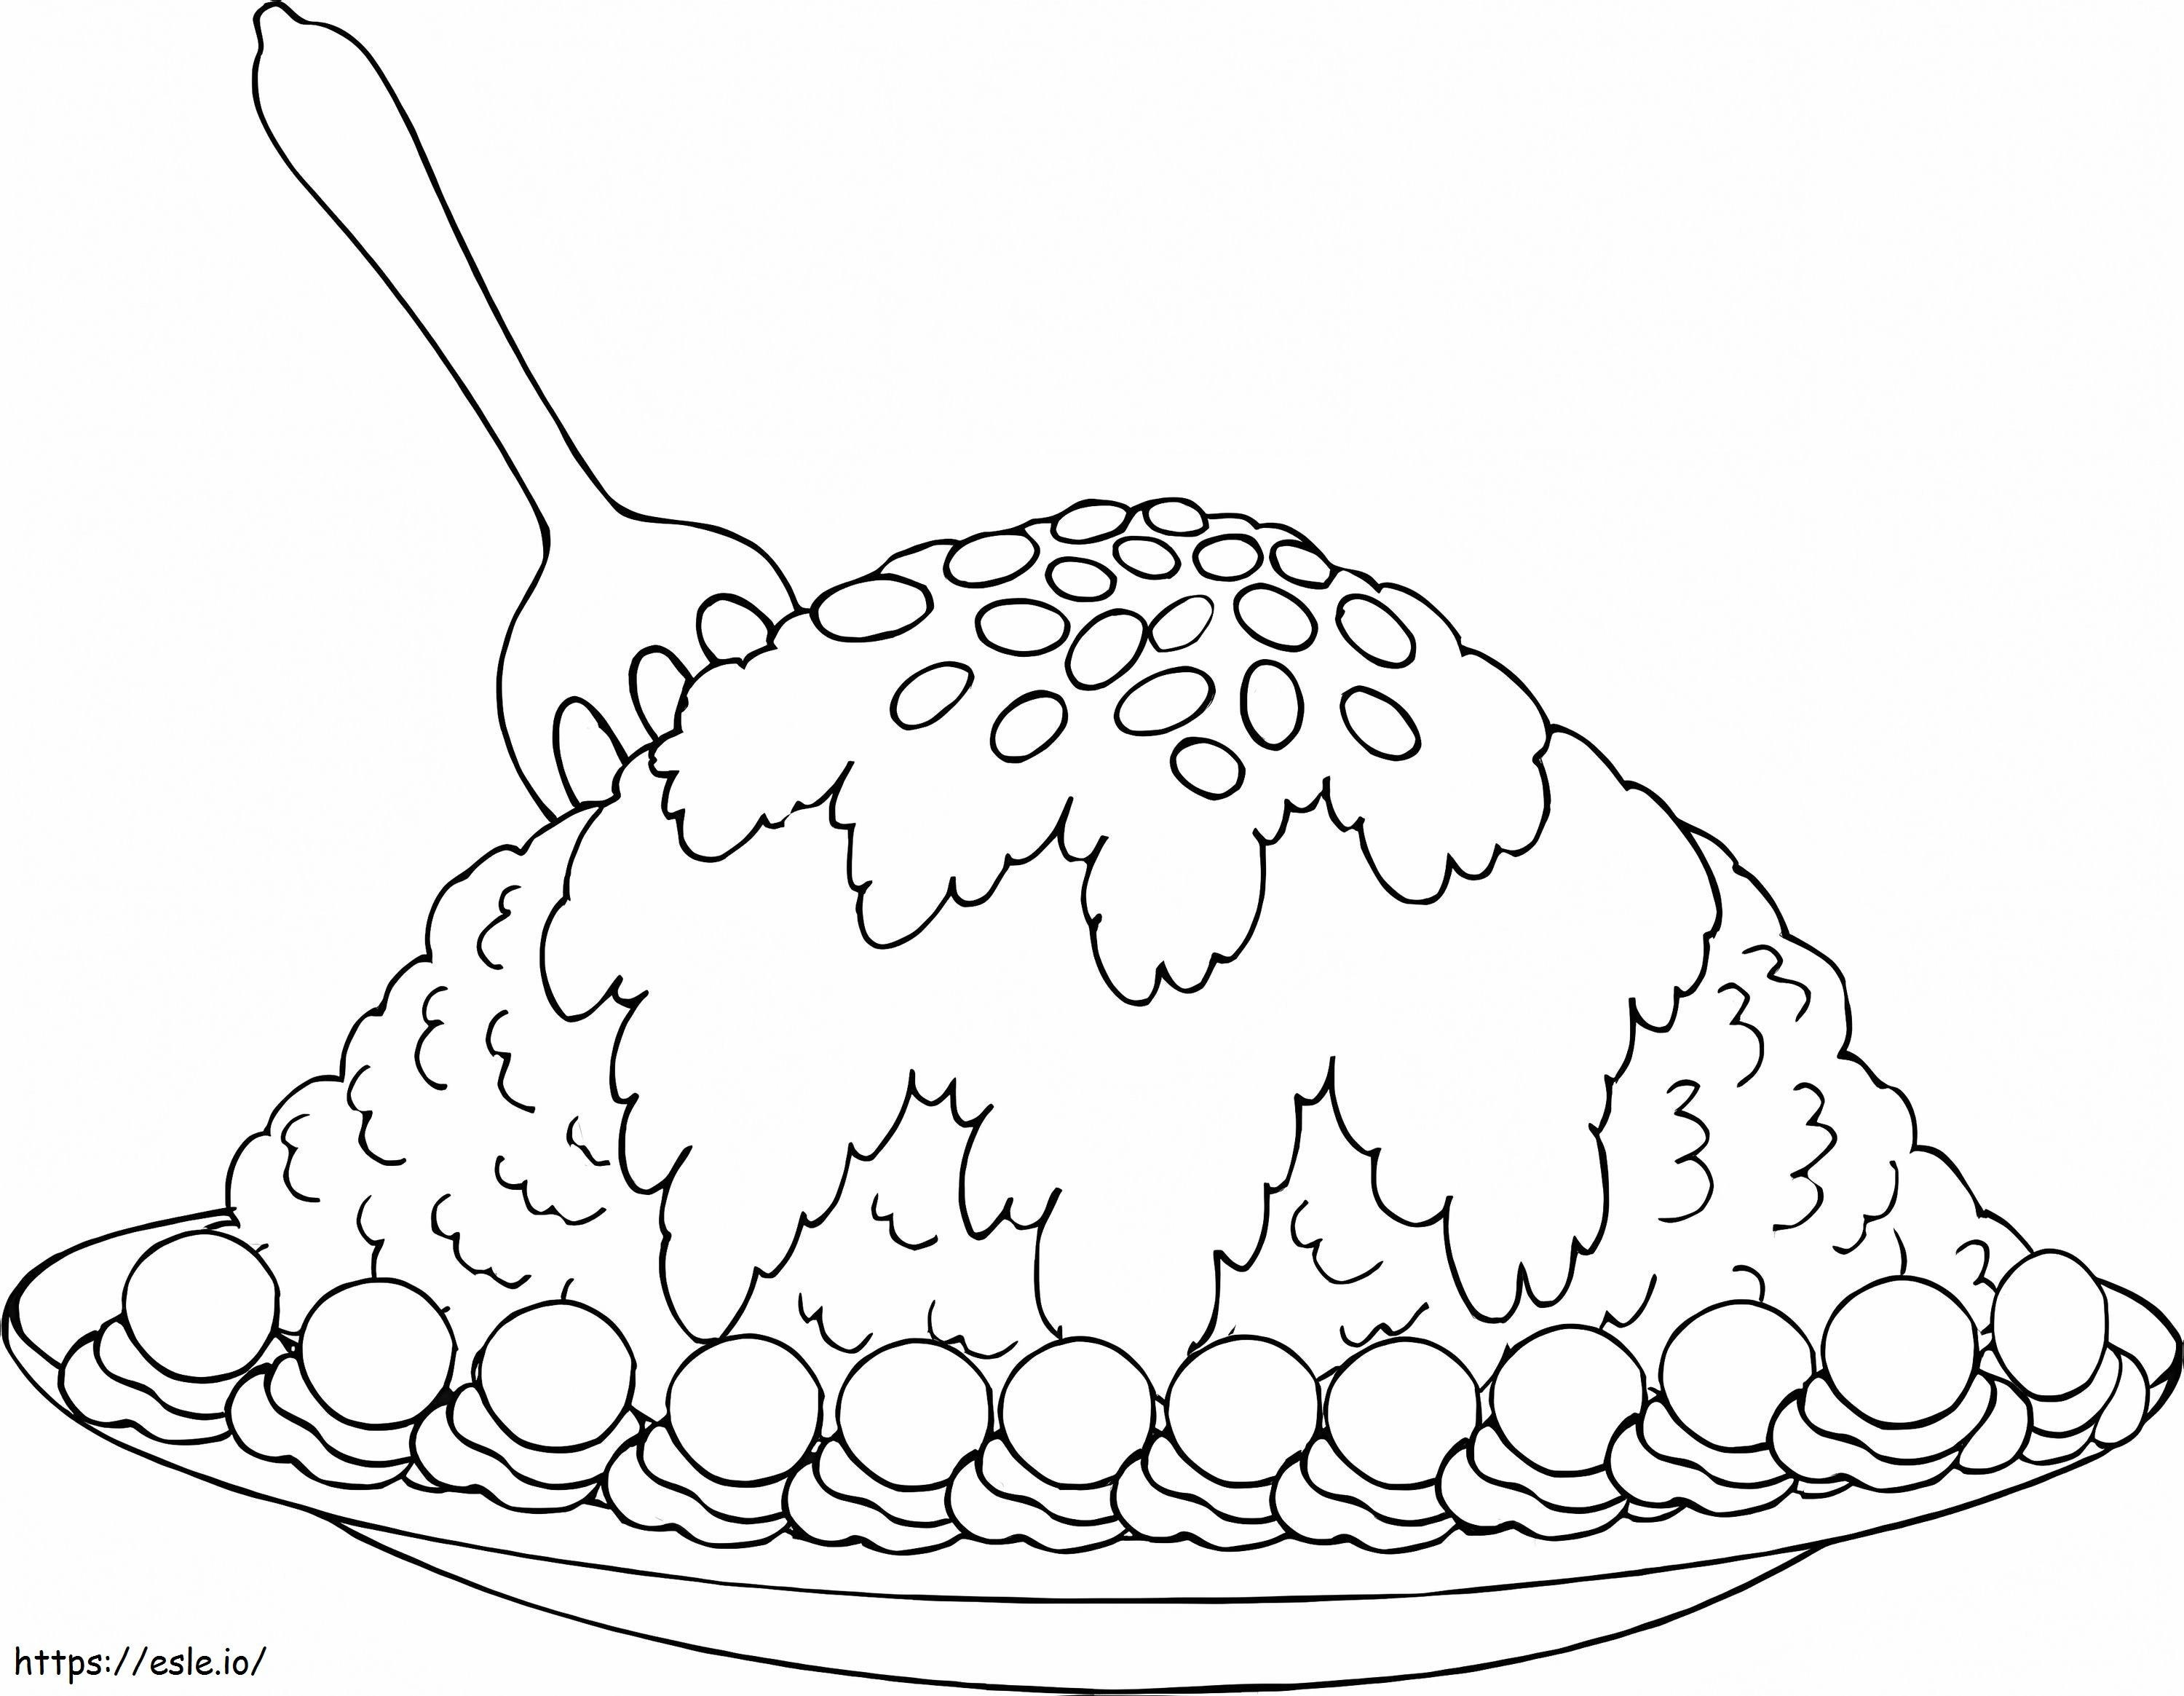 Dessert Dish coloring page